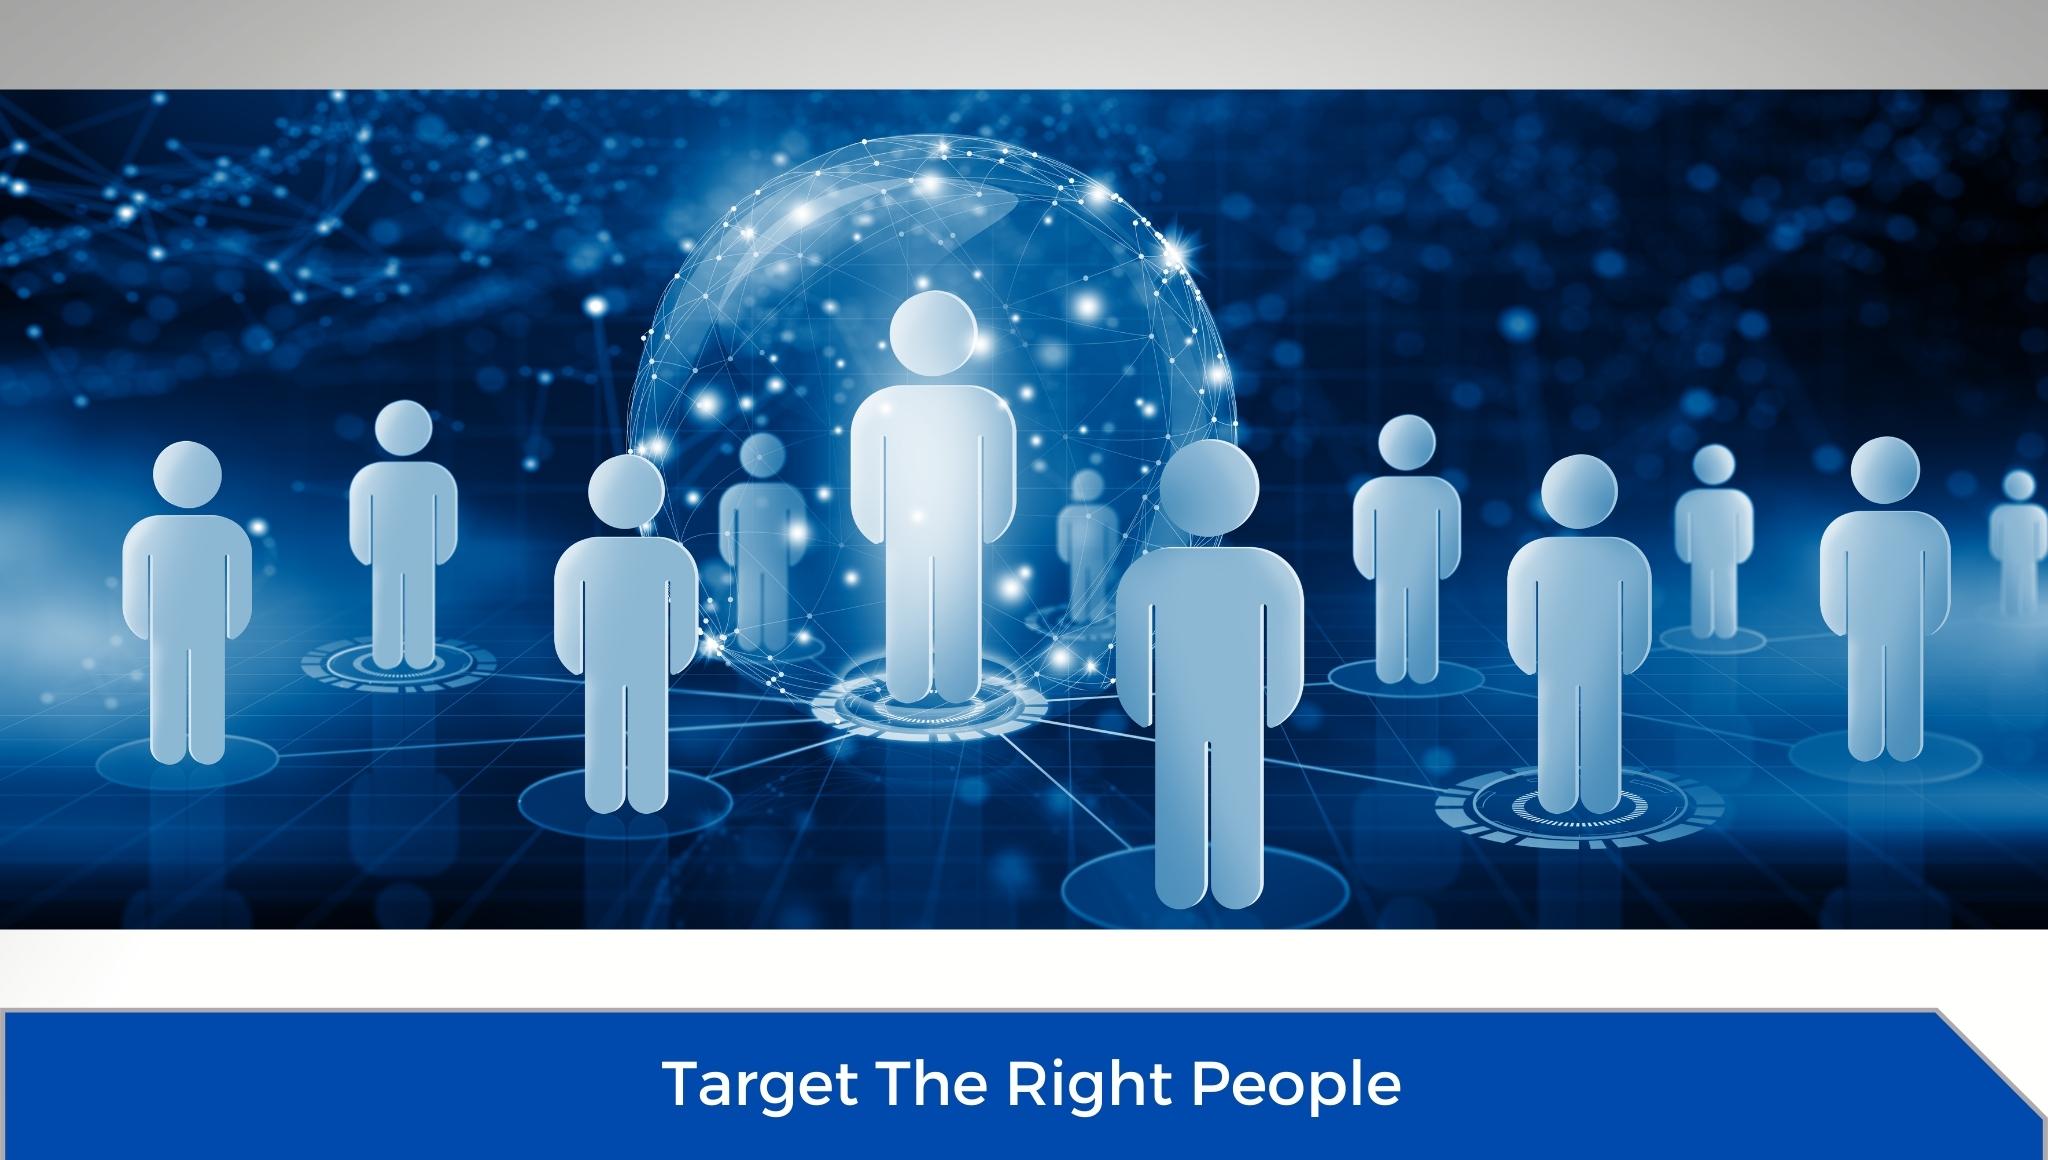 Target the right people